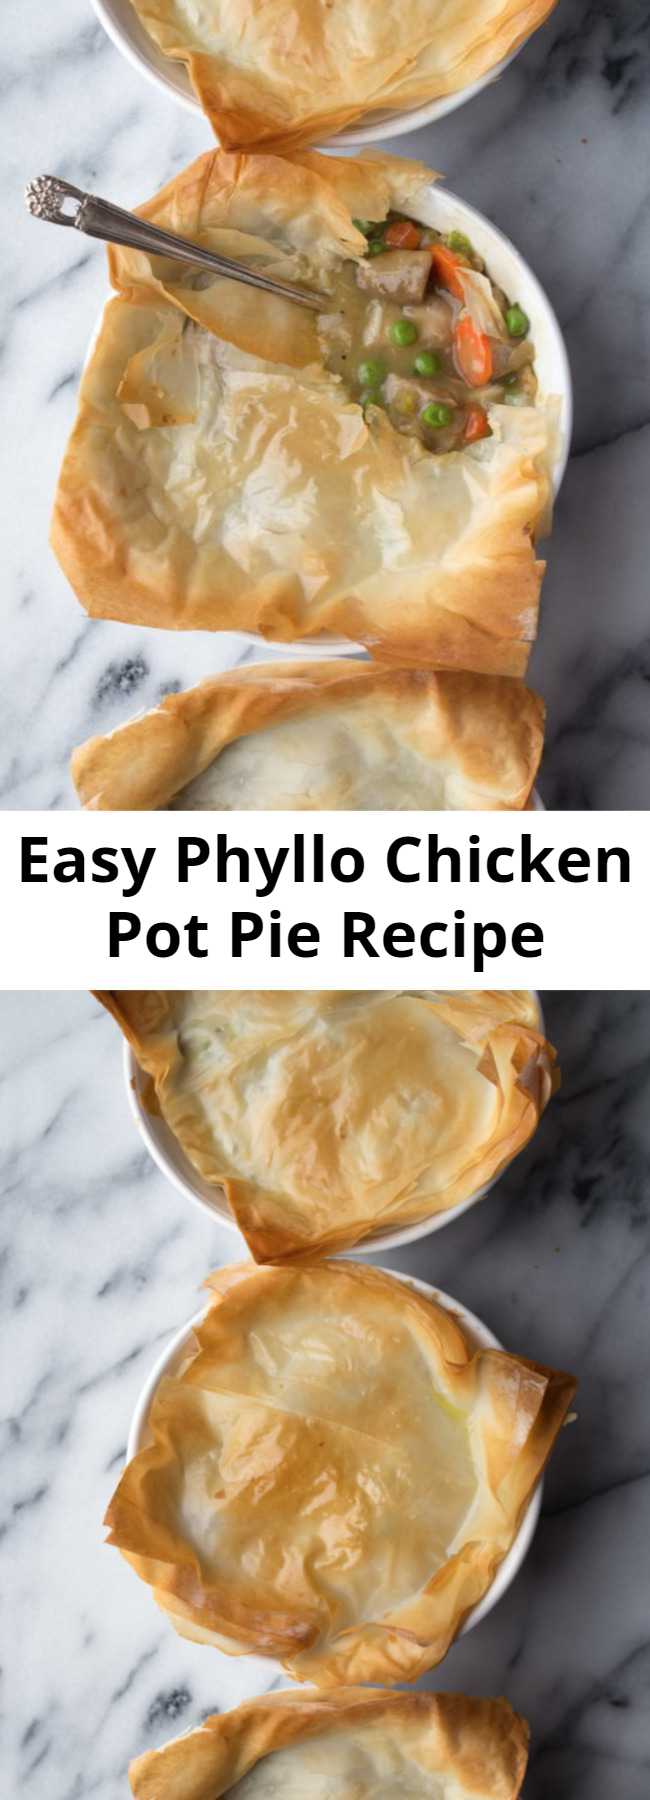 Easy Phyllo Chicken Pot Pie Recipe - Save a ton of calories and fat by using phyllo and this simple recipe for Phyllo Chicken Pot Pie! So easy and incredibly delicious!